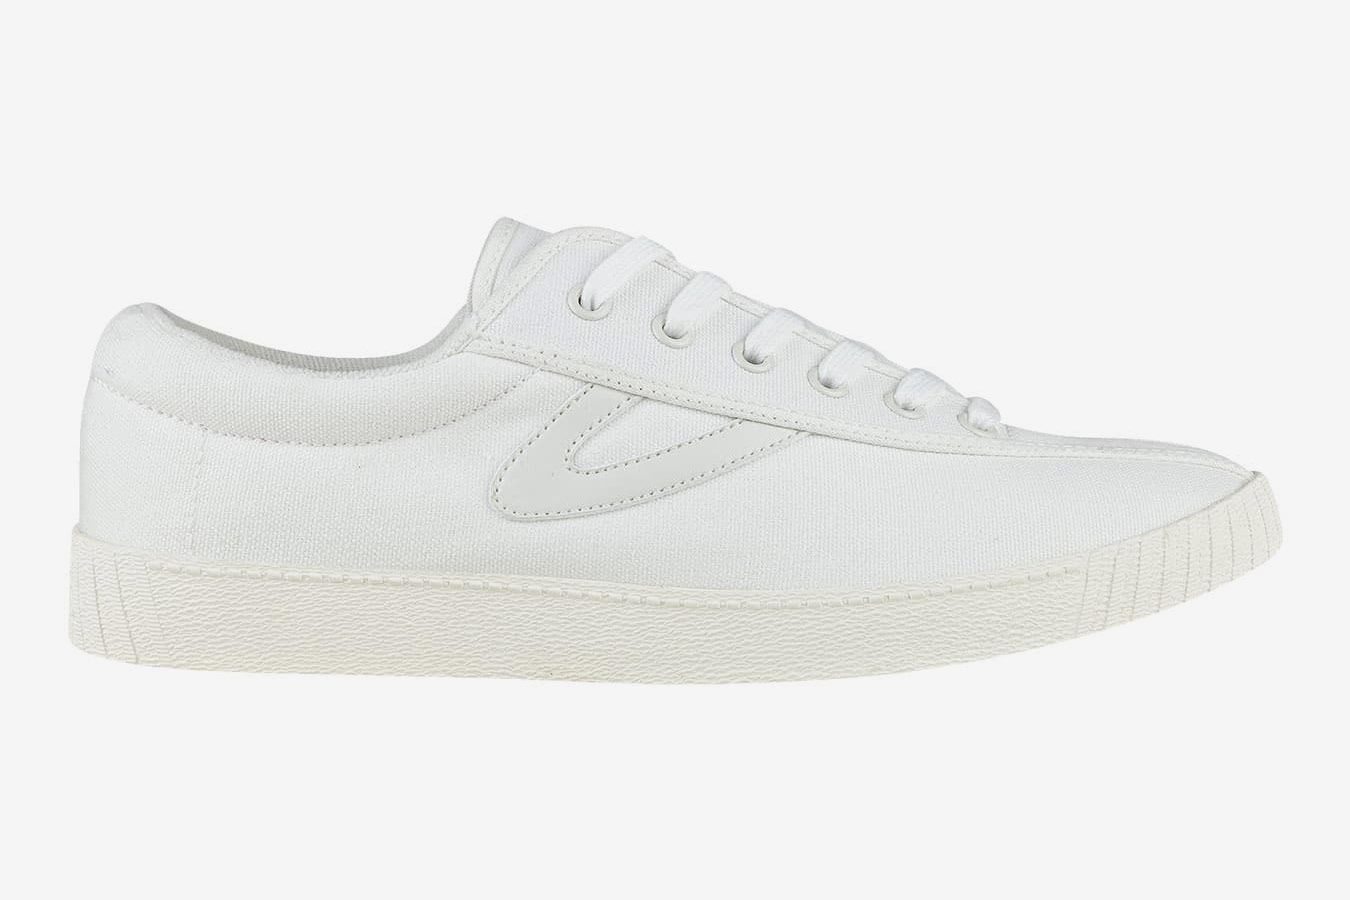 The Best White Sneakers 2021 | The Strategist